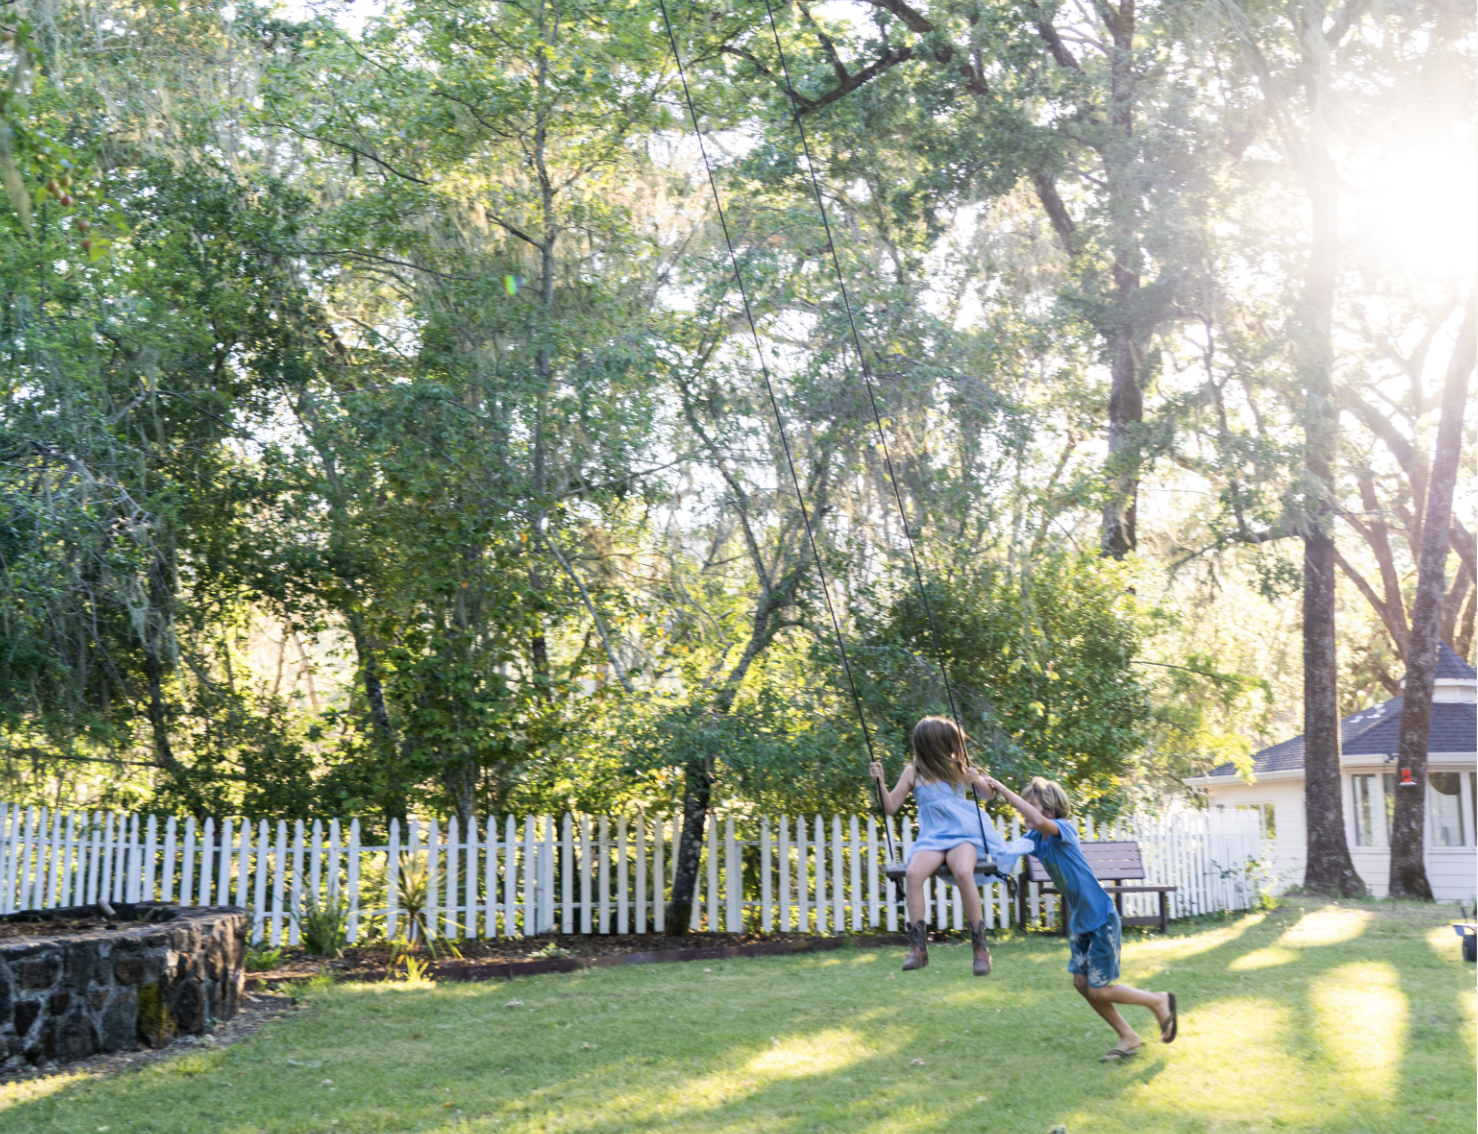 A yard with picket fence, tree swing and trees